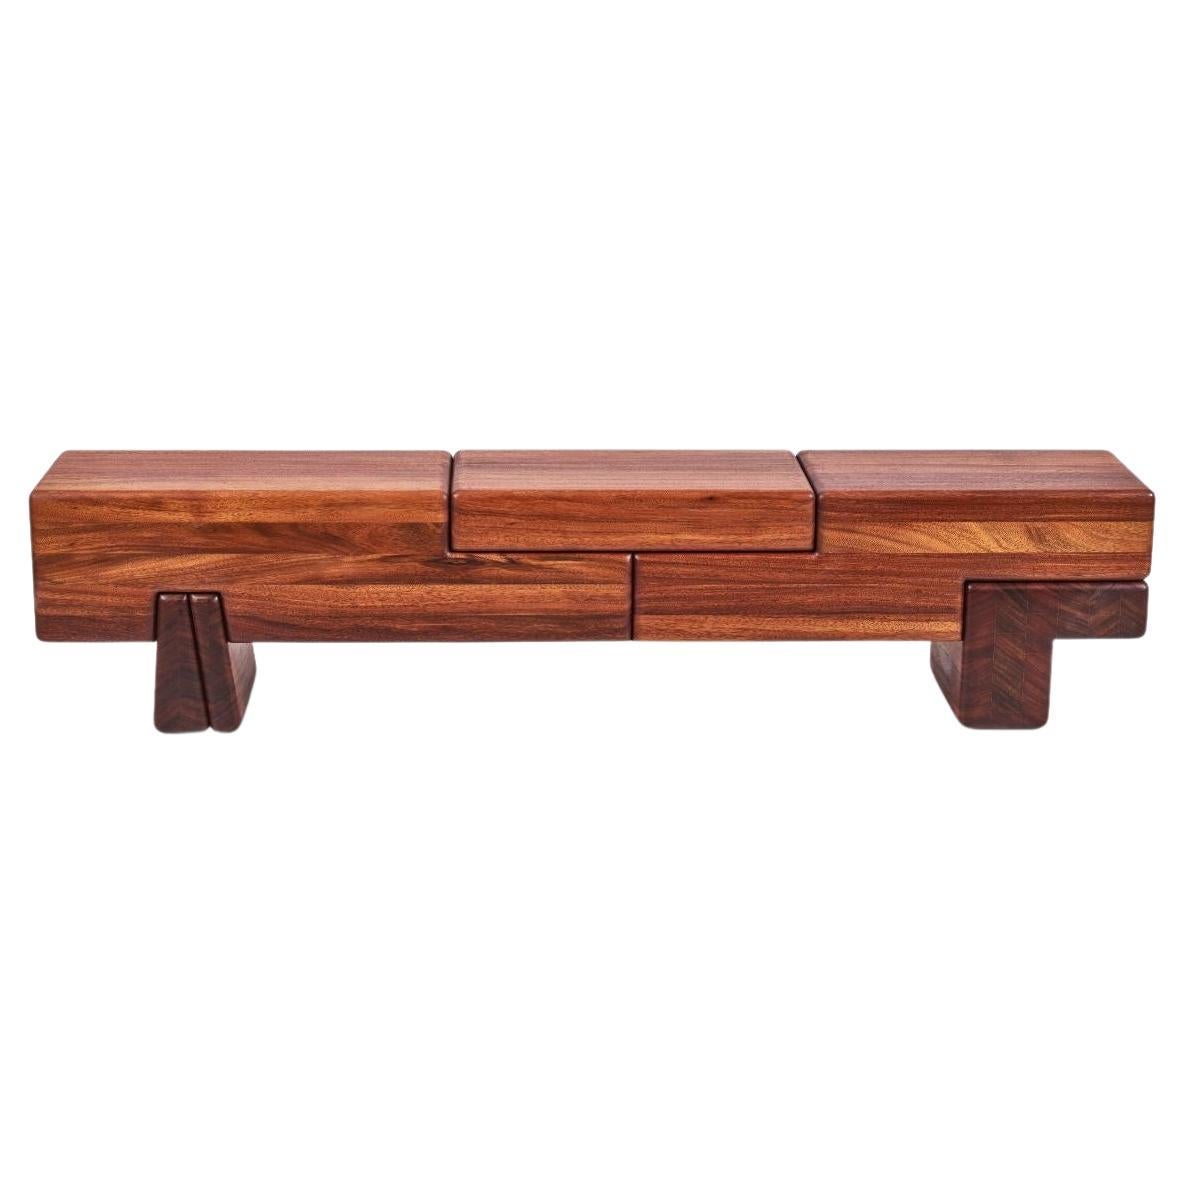 Okan D'arfique Laminated Bench by Contemporary Ecowood